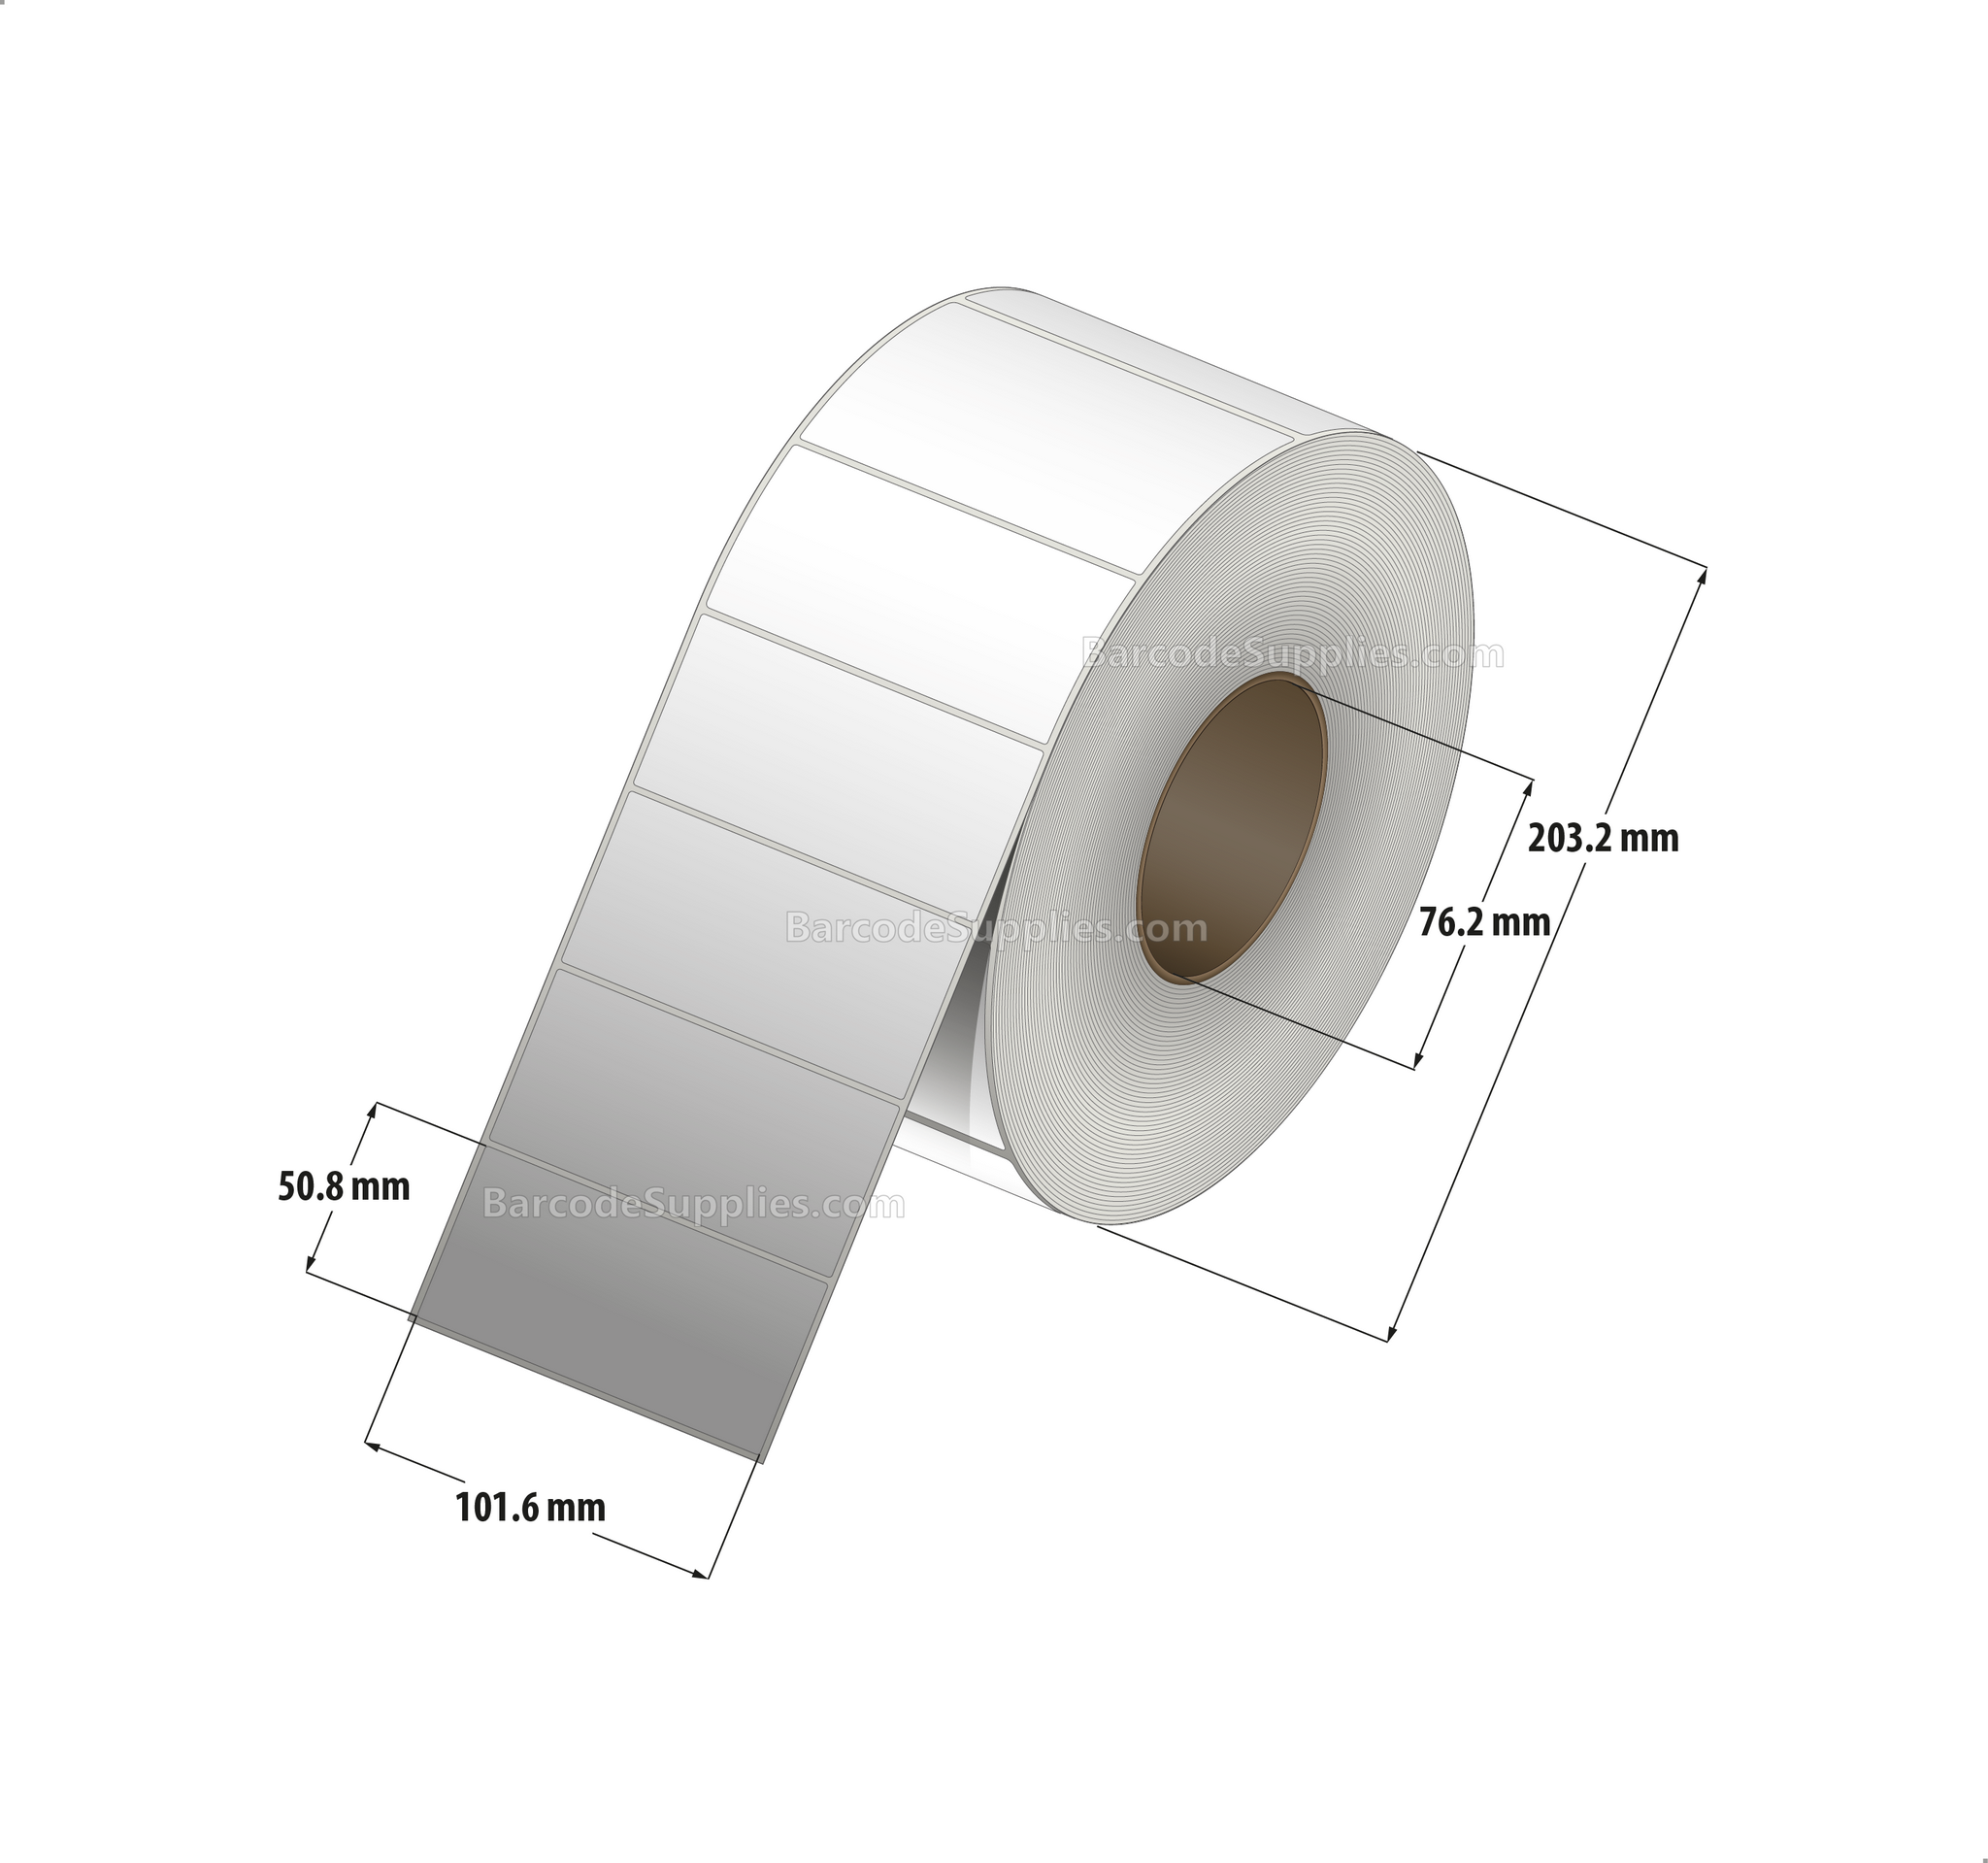 4 x 2 Thermal Transfer White Labels With Permanent Adhesive - No Perforation - 2900 Labels Per Roll - Carton Of 4 Rolls - 11600 Labels Total - MPN: RT-4-2-2900-NP